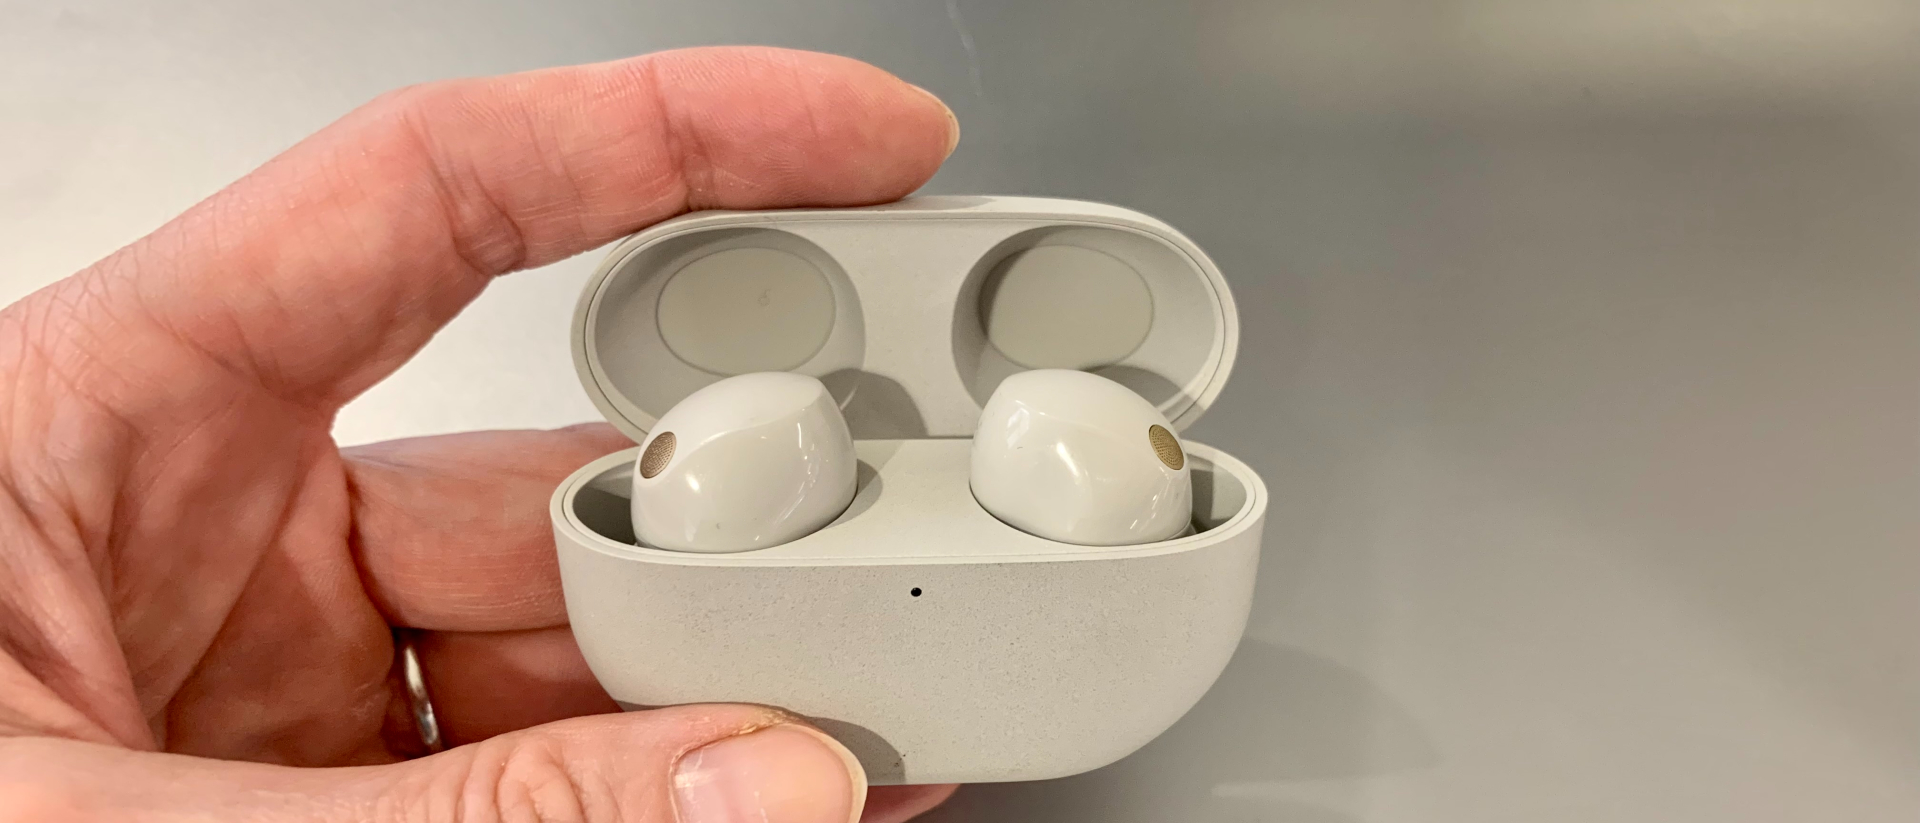 Sony WF-1000XM5 review: Are These Earbuds Worth the Hype? - Heyup